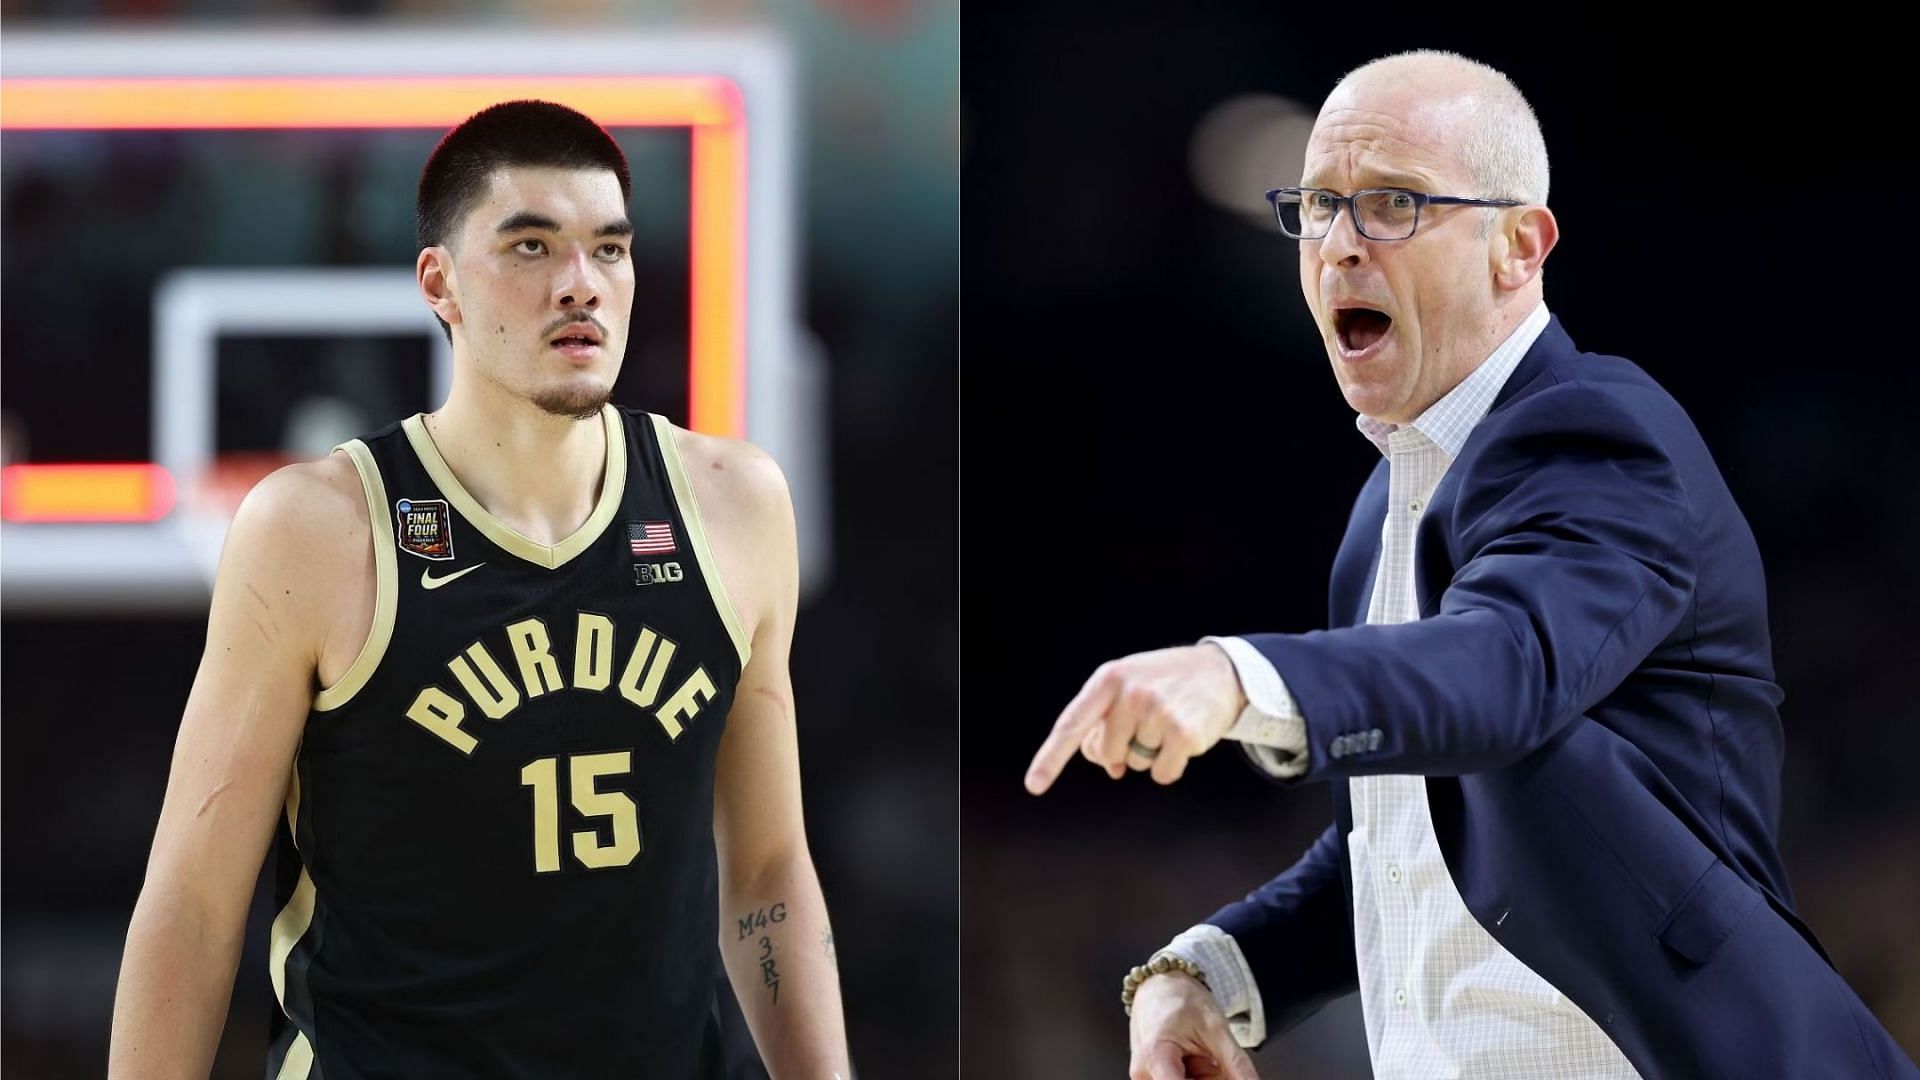 Purdue center Zach Edey had a brief exchange with UConn coach Dan Hurley at the half of their national championship clash at the State Farm Stadium in Glendale, Arizona.